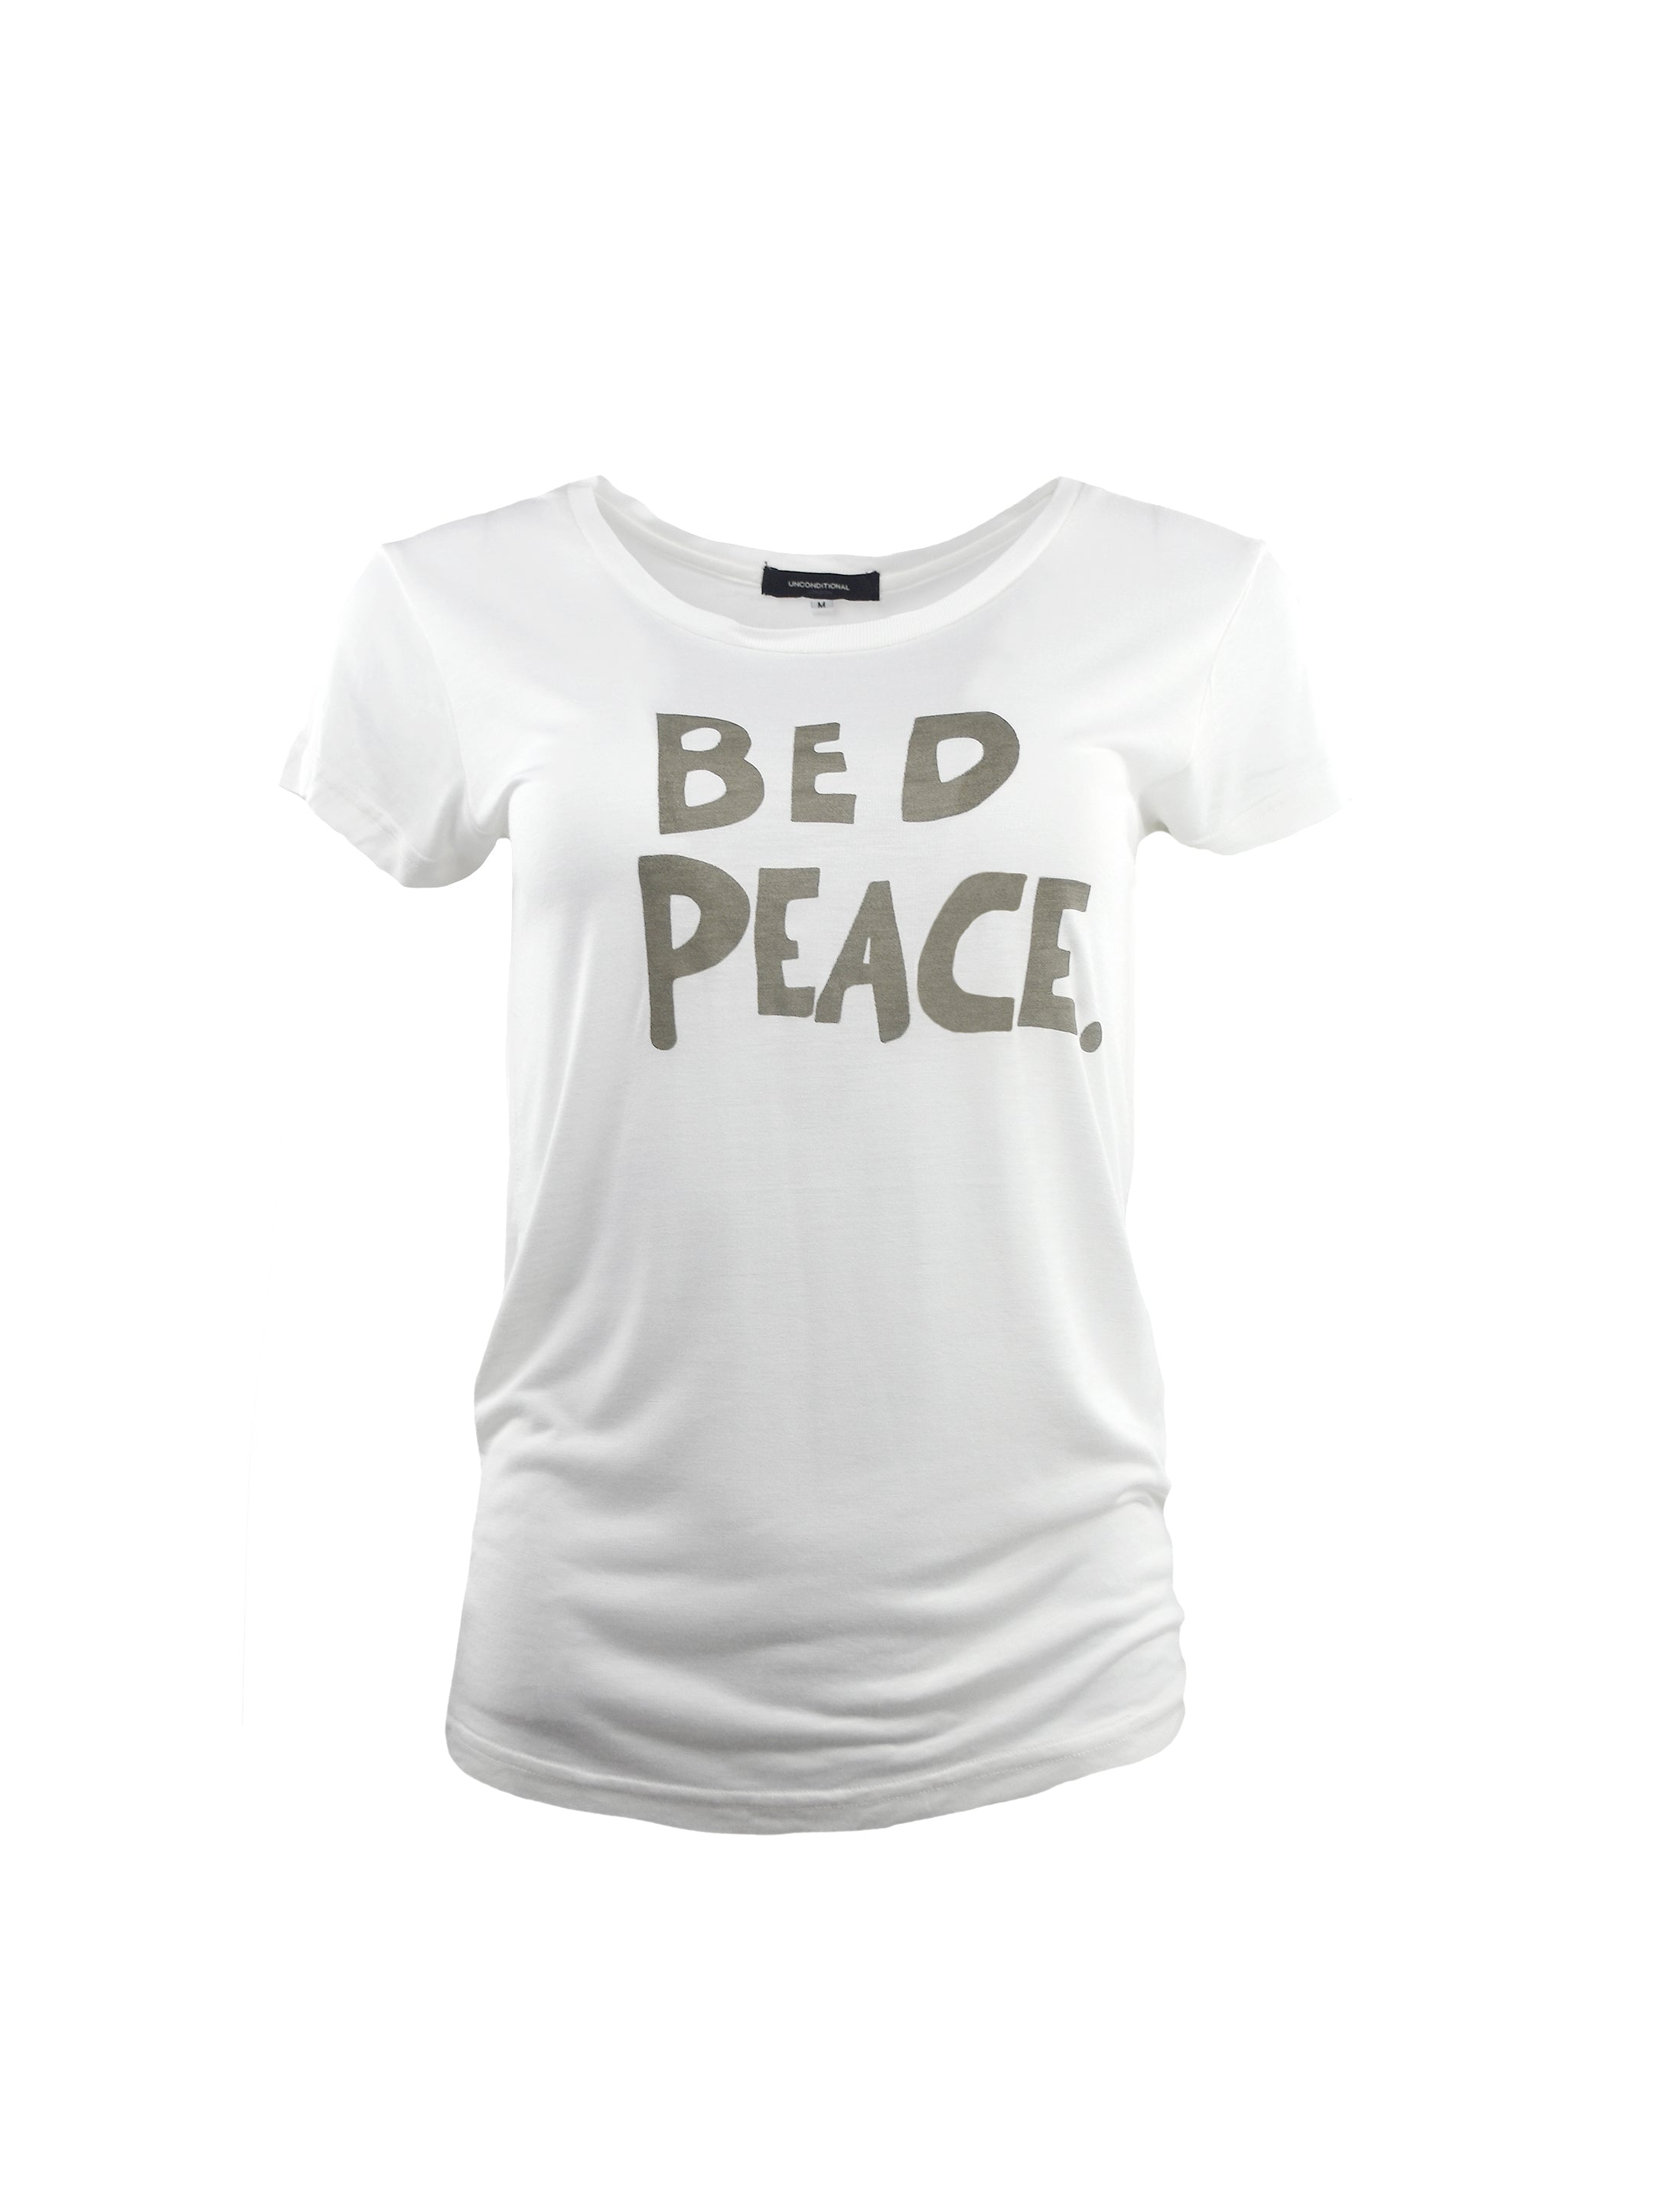 WHITE BED PEACE T-SHIRT